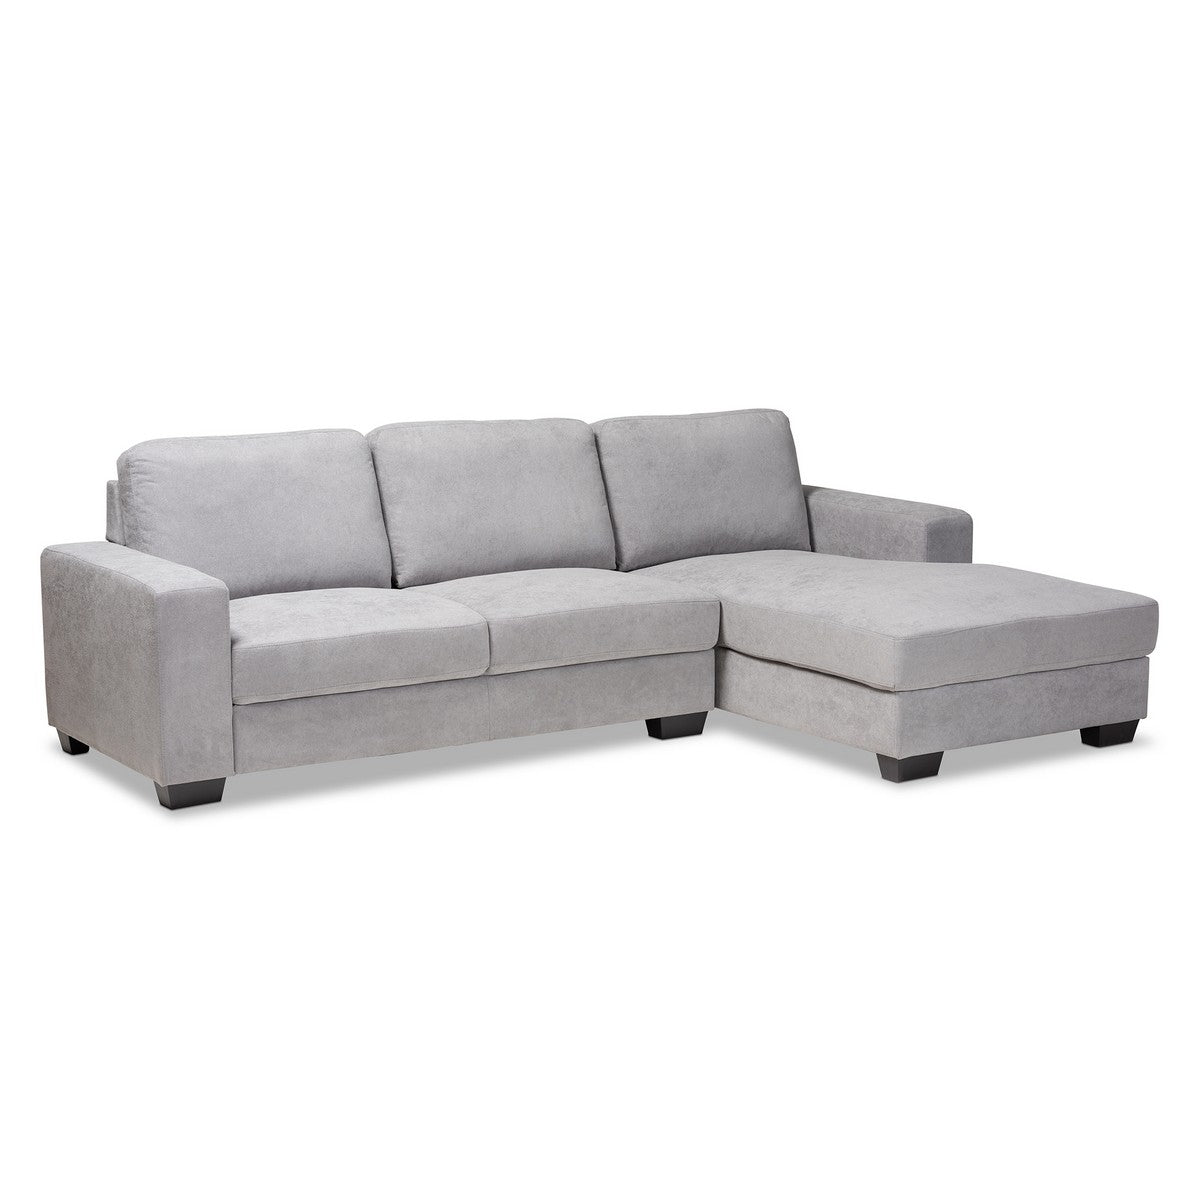 Baxton Studio Nevin Modern and Contemporary Light Grey Fabric Upholstered Sectional Sofa with Right Facing Chaise Baxton Studio-sectionals-Minimal And Modern - 1